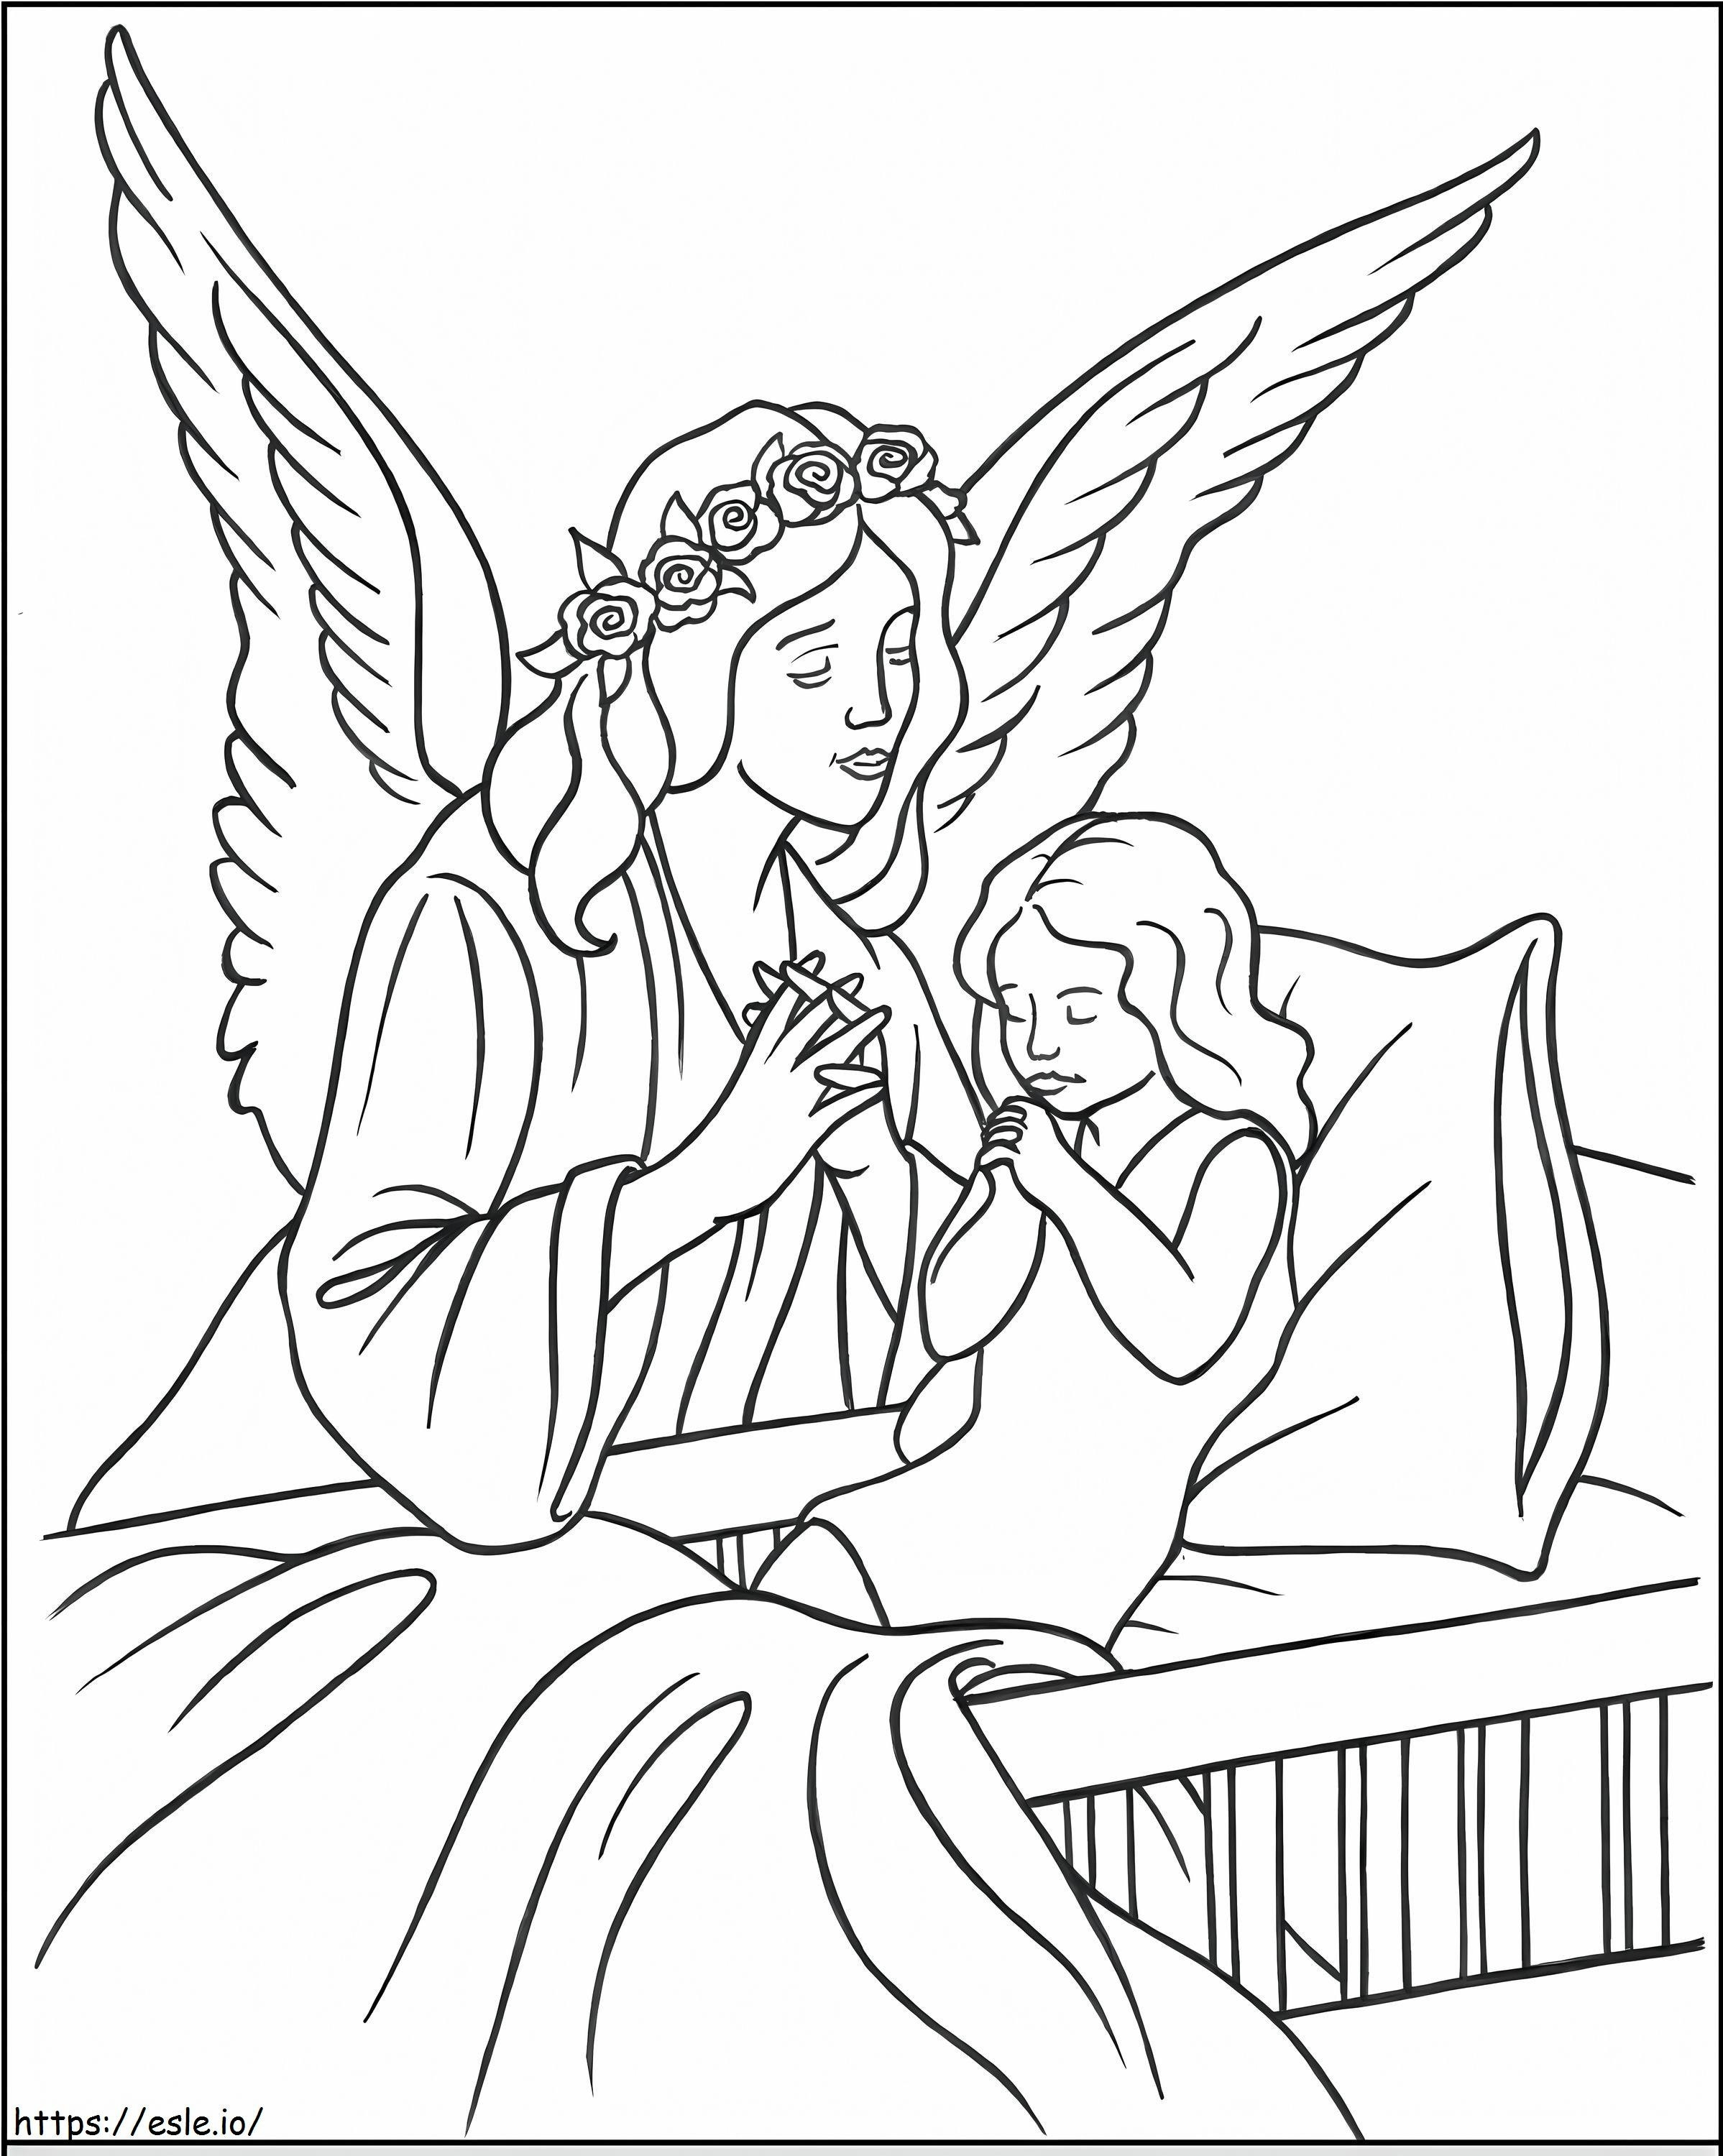 Angel With Child coloring page